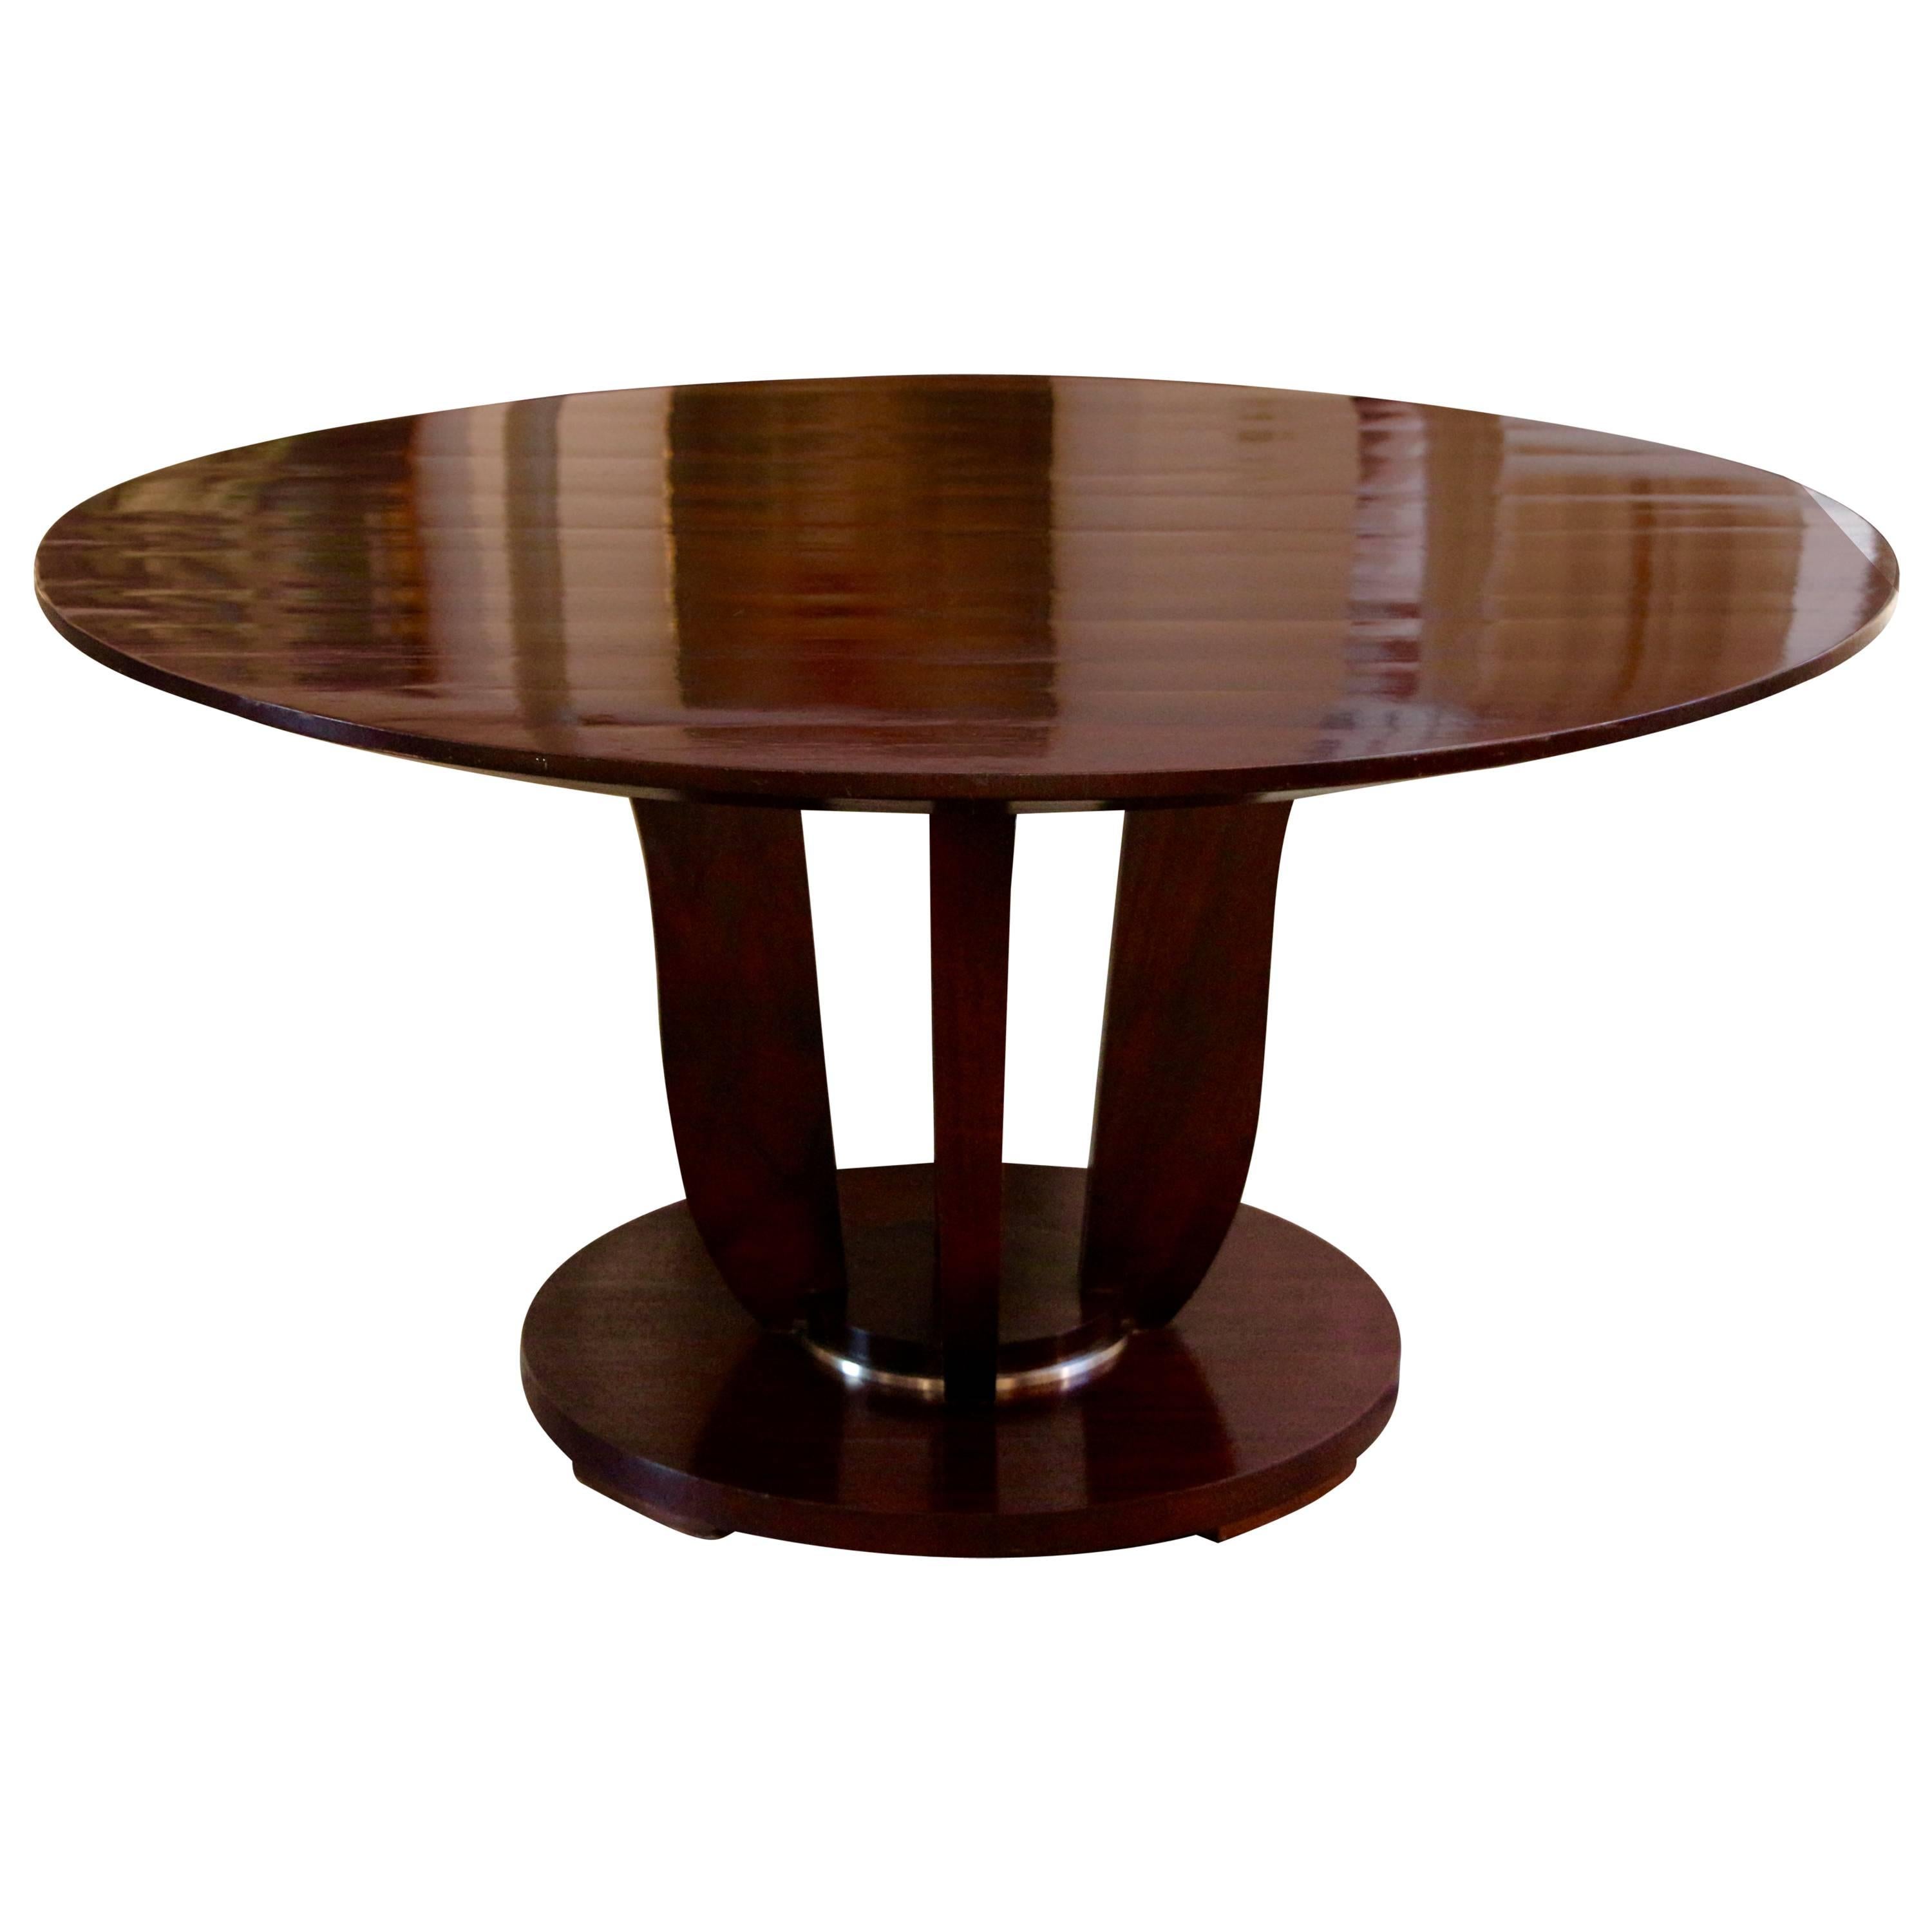 Barbara Barry for Baker Dining Table